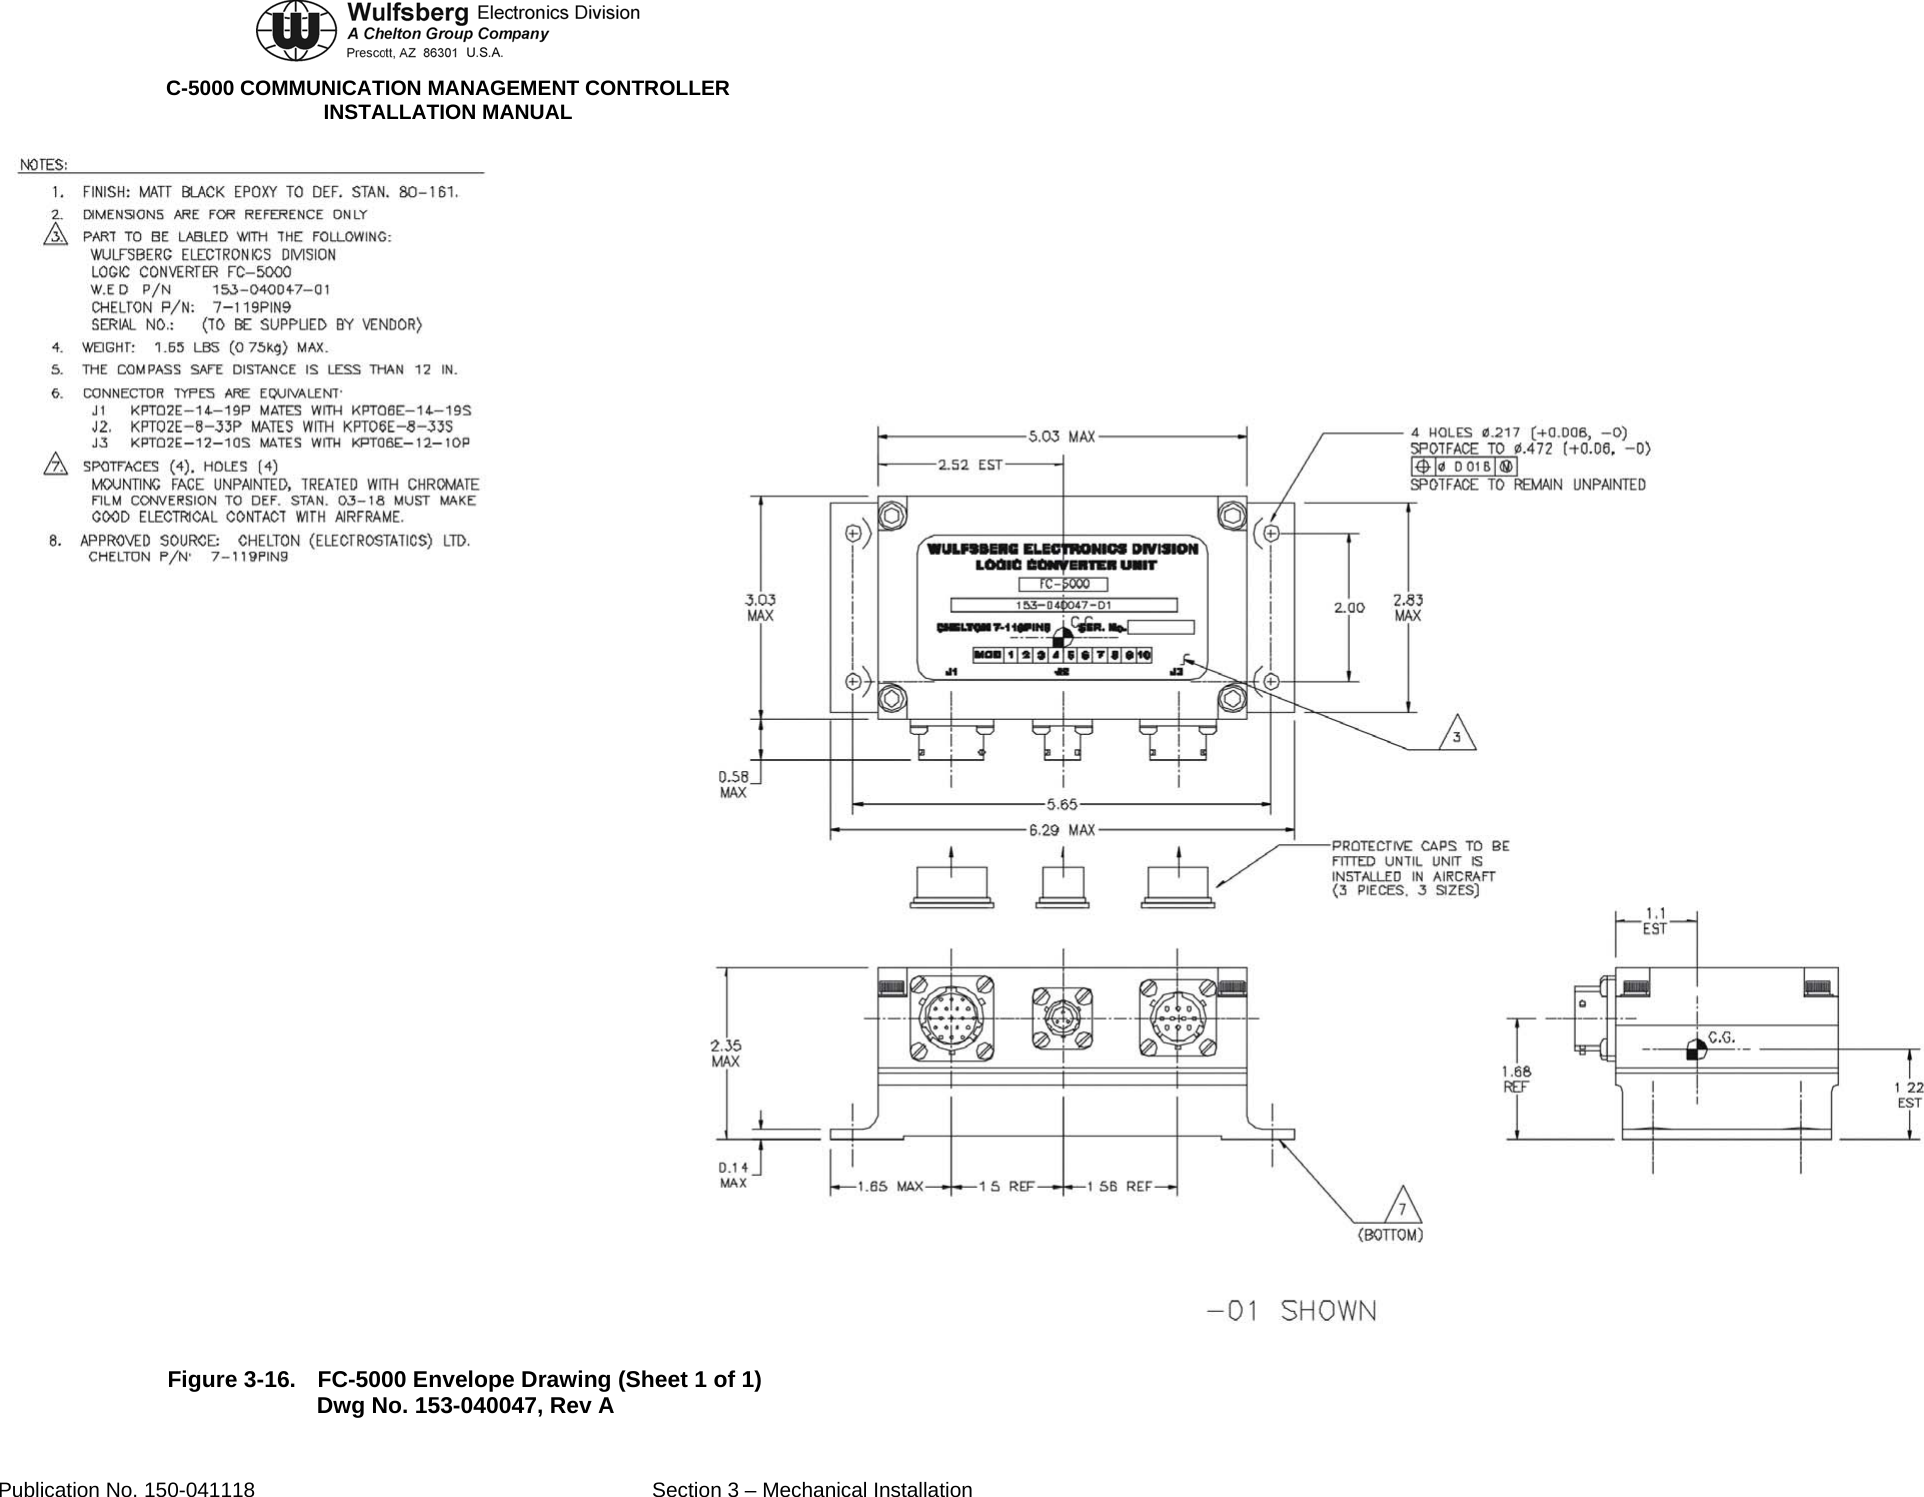  C-5000 COMMUNICATION MANAGEMENT CONTROLLER INSTALLATION MANUAL  Figure 3-16.  FC-5000 Envelope Drawing (Sheet 1 of 1) Dwg No. 153-040047, Rev A Publication No. 150-041118  Section 3 – Mechanical Installation 